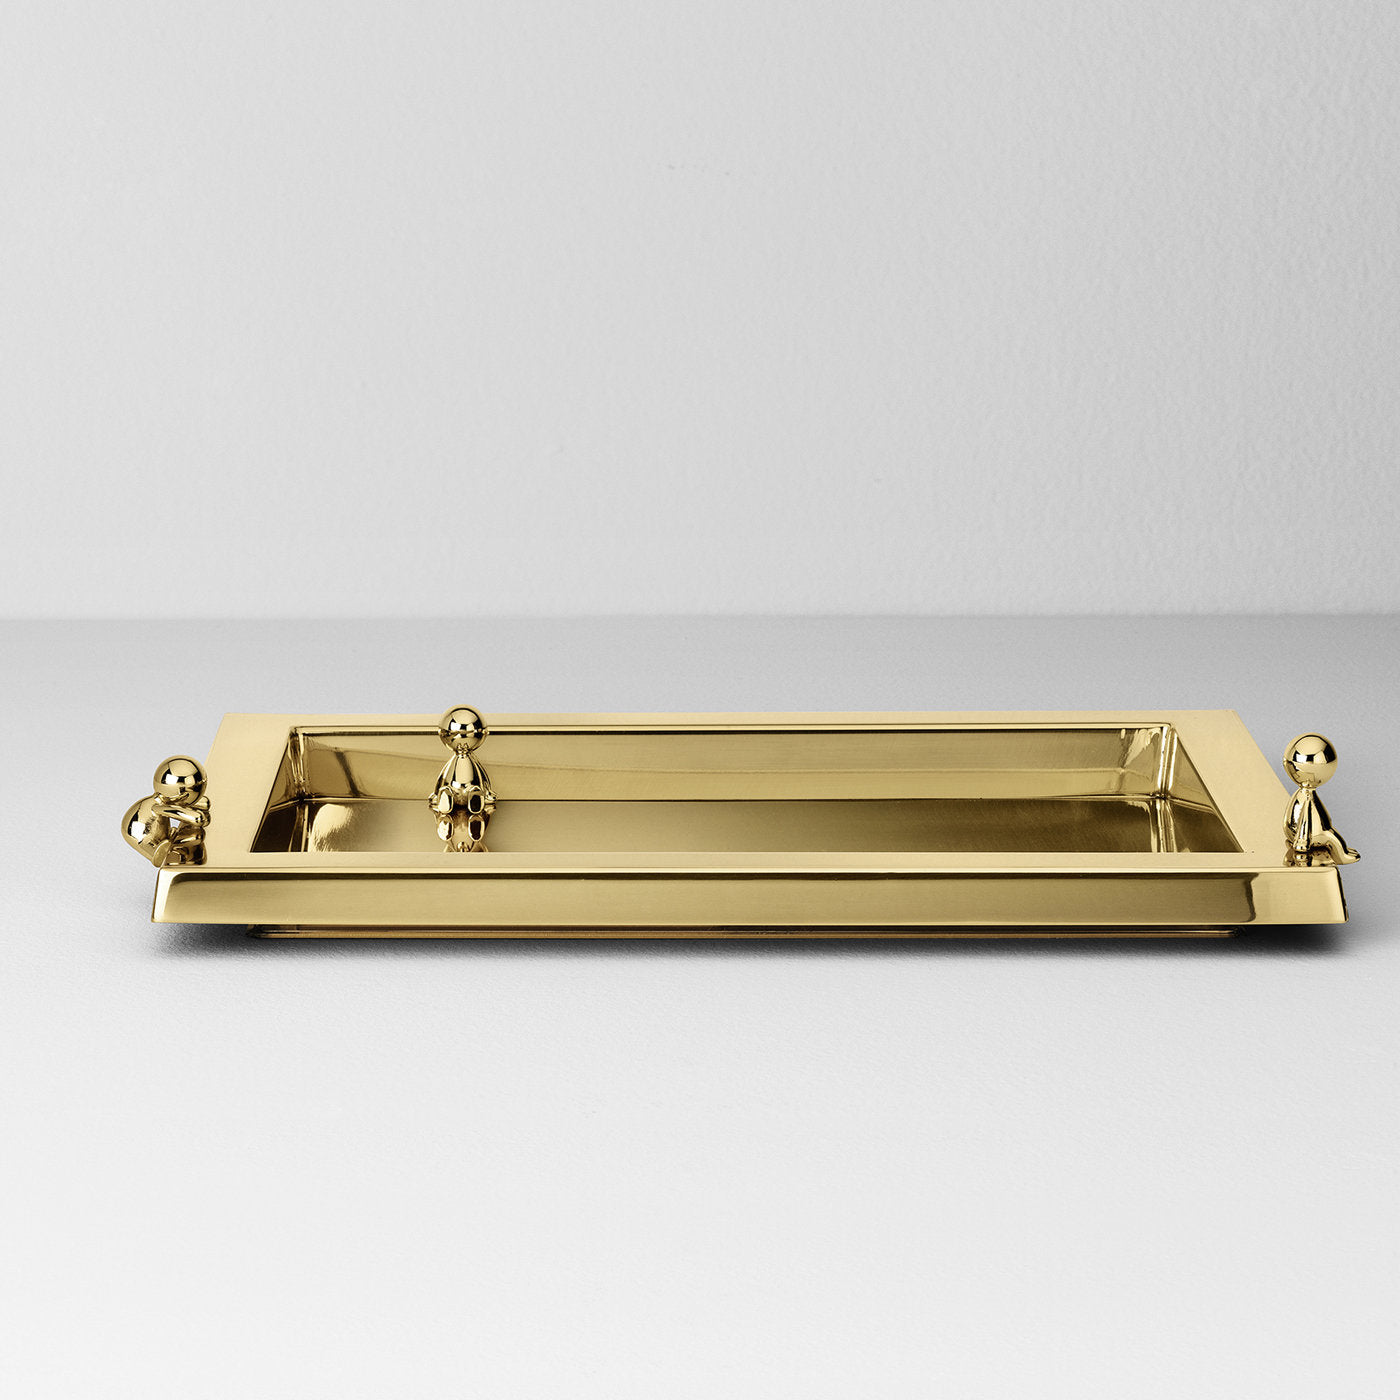 Omini Tray in Polished Brass By Stefano Giovannoni - Alternative view 2